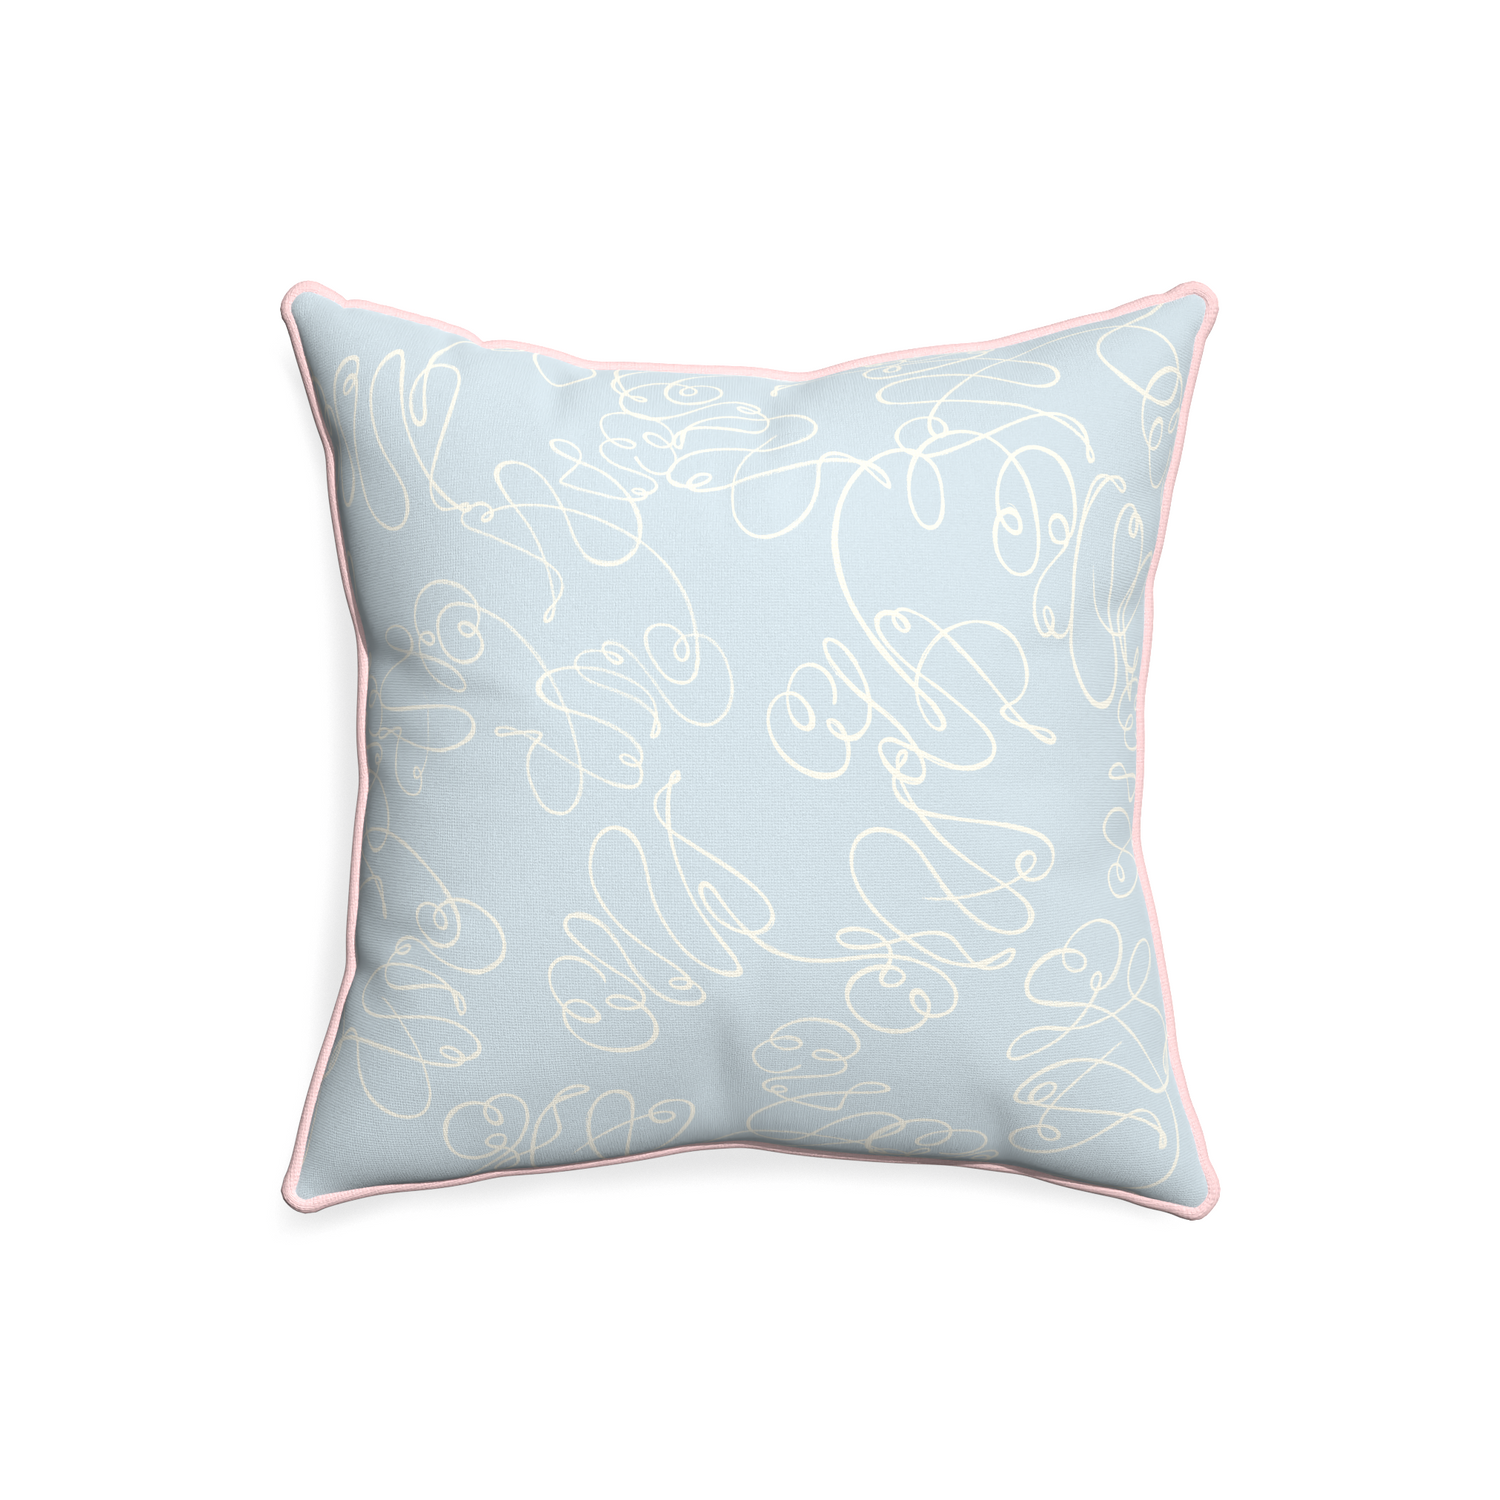 20-square mirabella custom powder blue abstractpillow with petal piping on white background